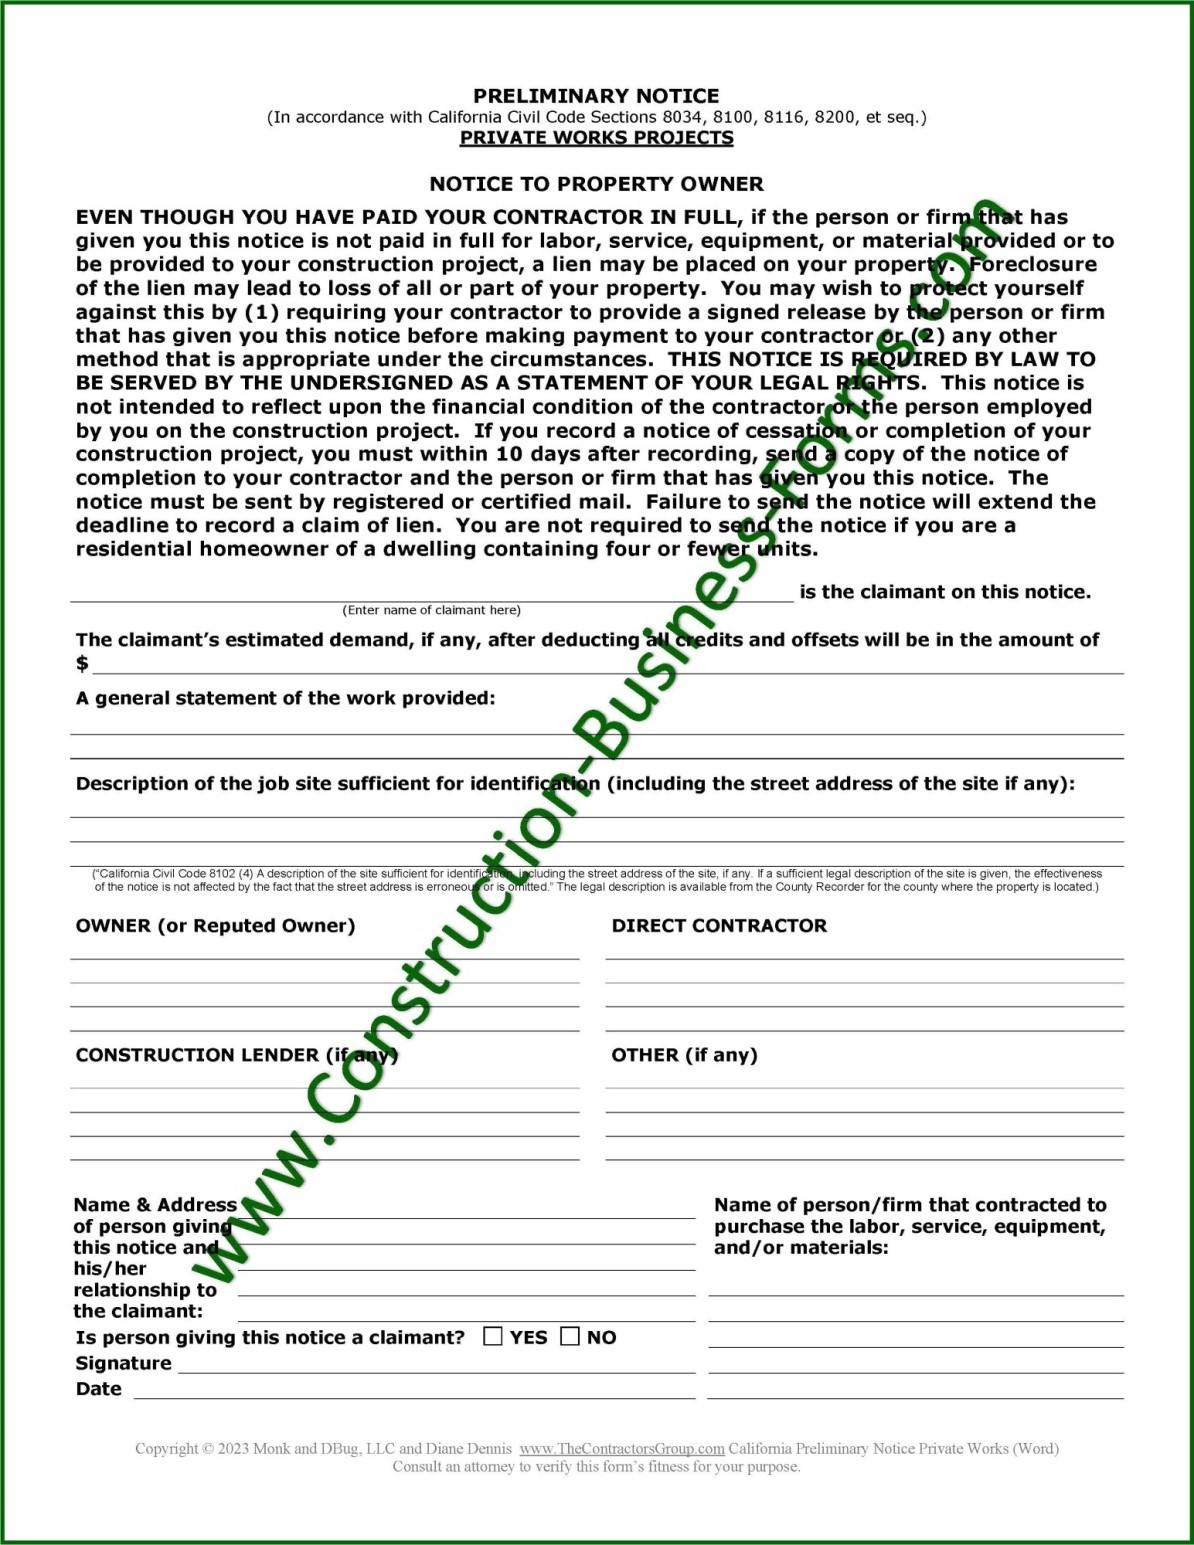 Image of, and link to, California 20-Day Preliminary Notice form